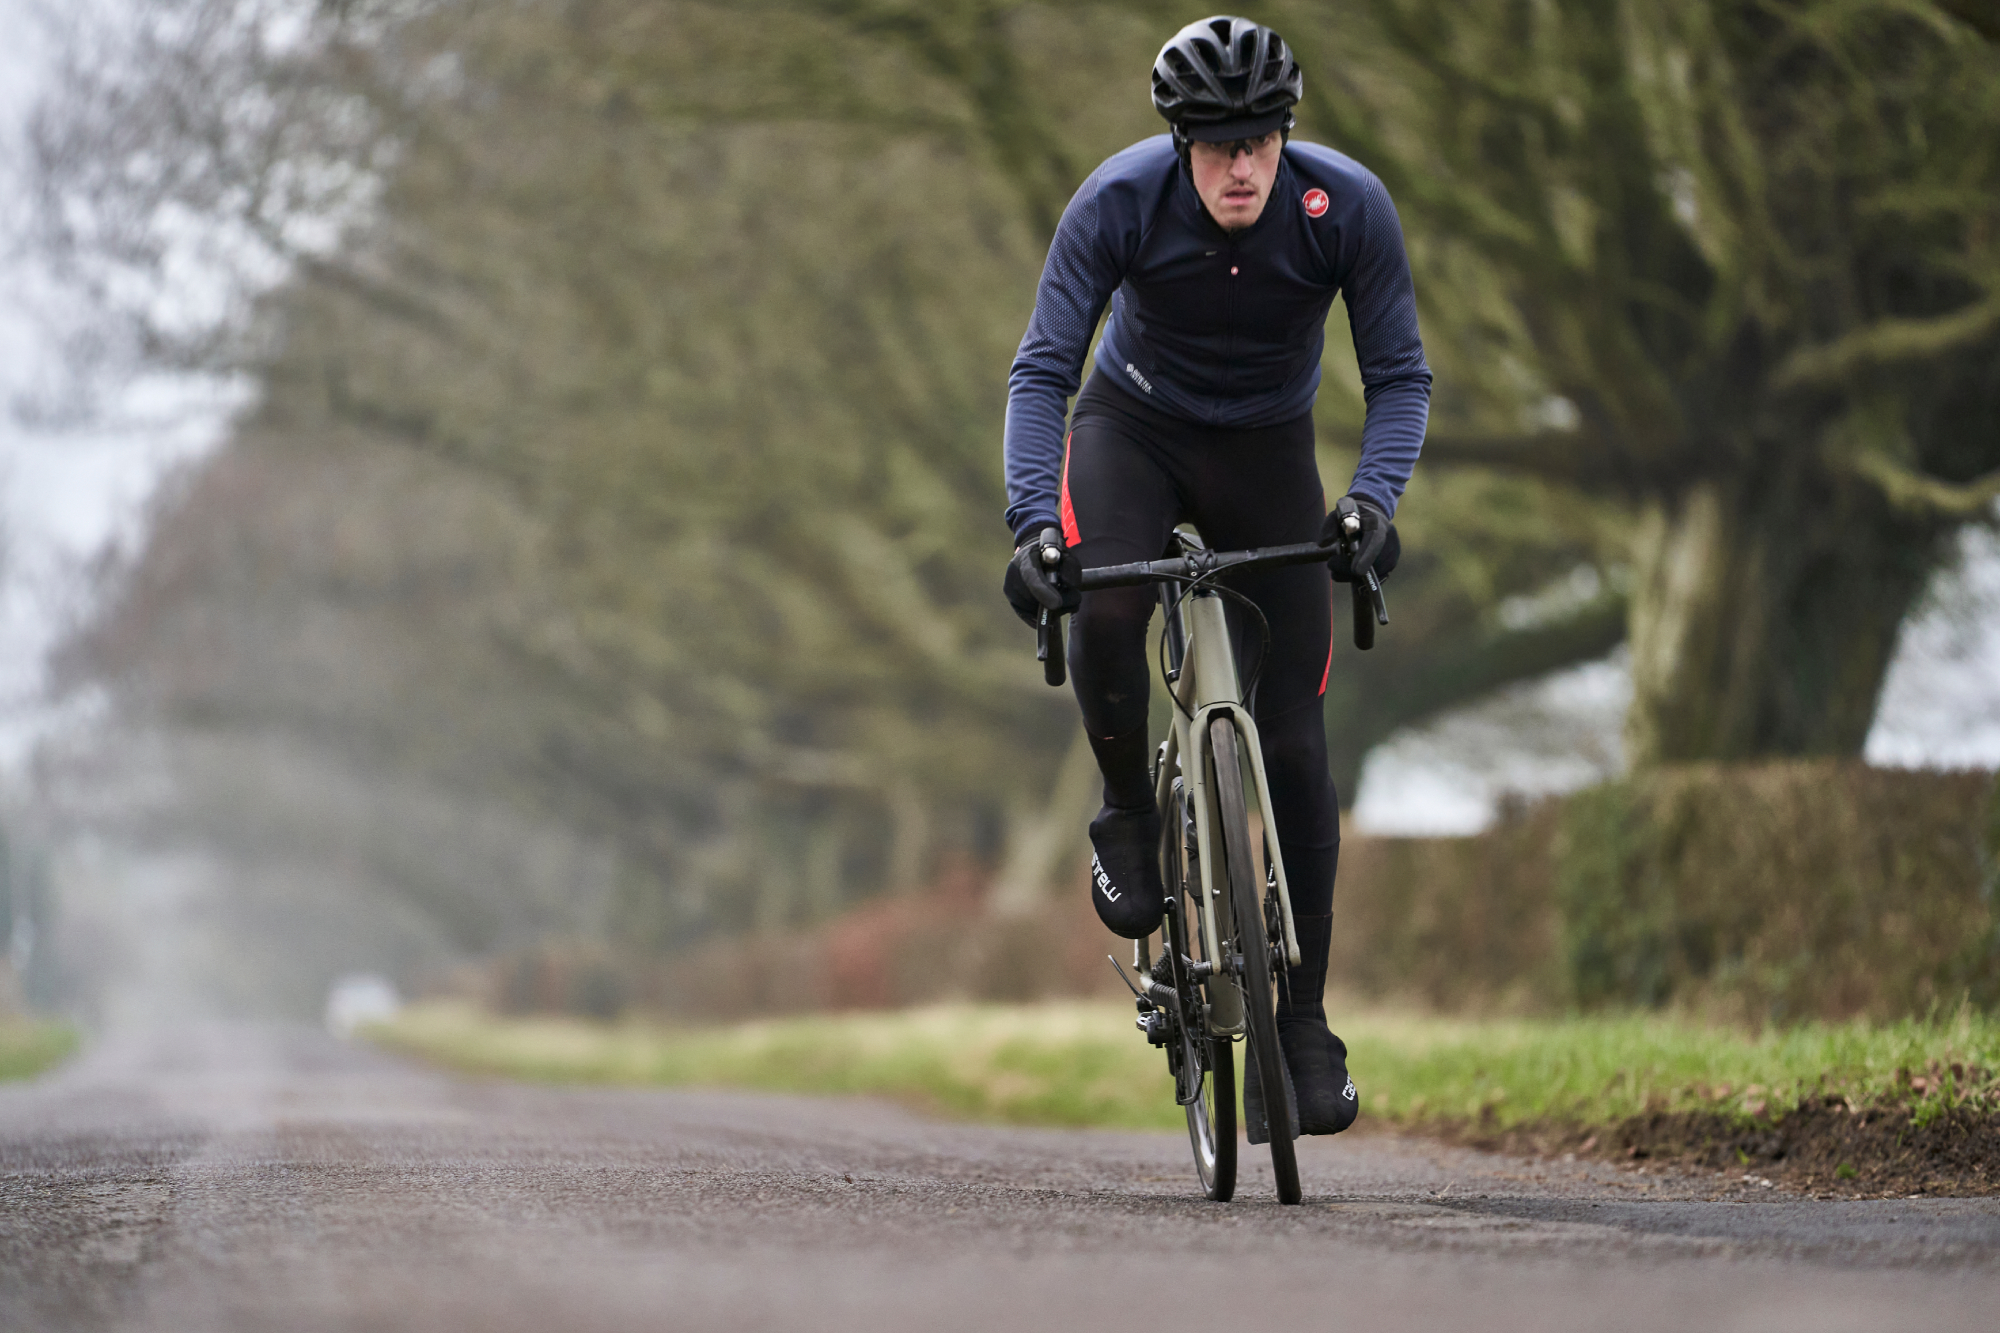 Image shows a person cycling during the winter